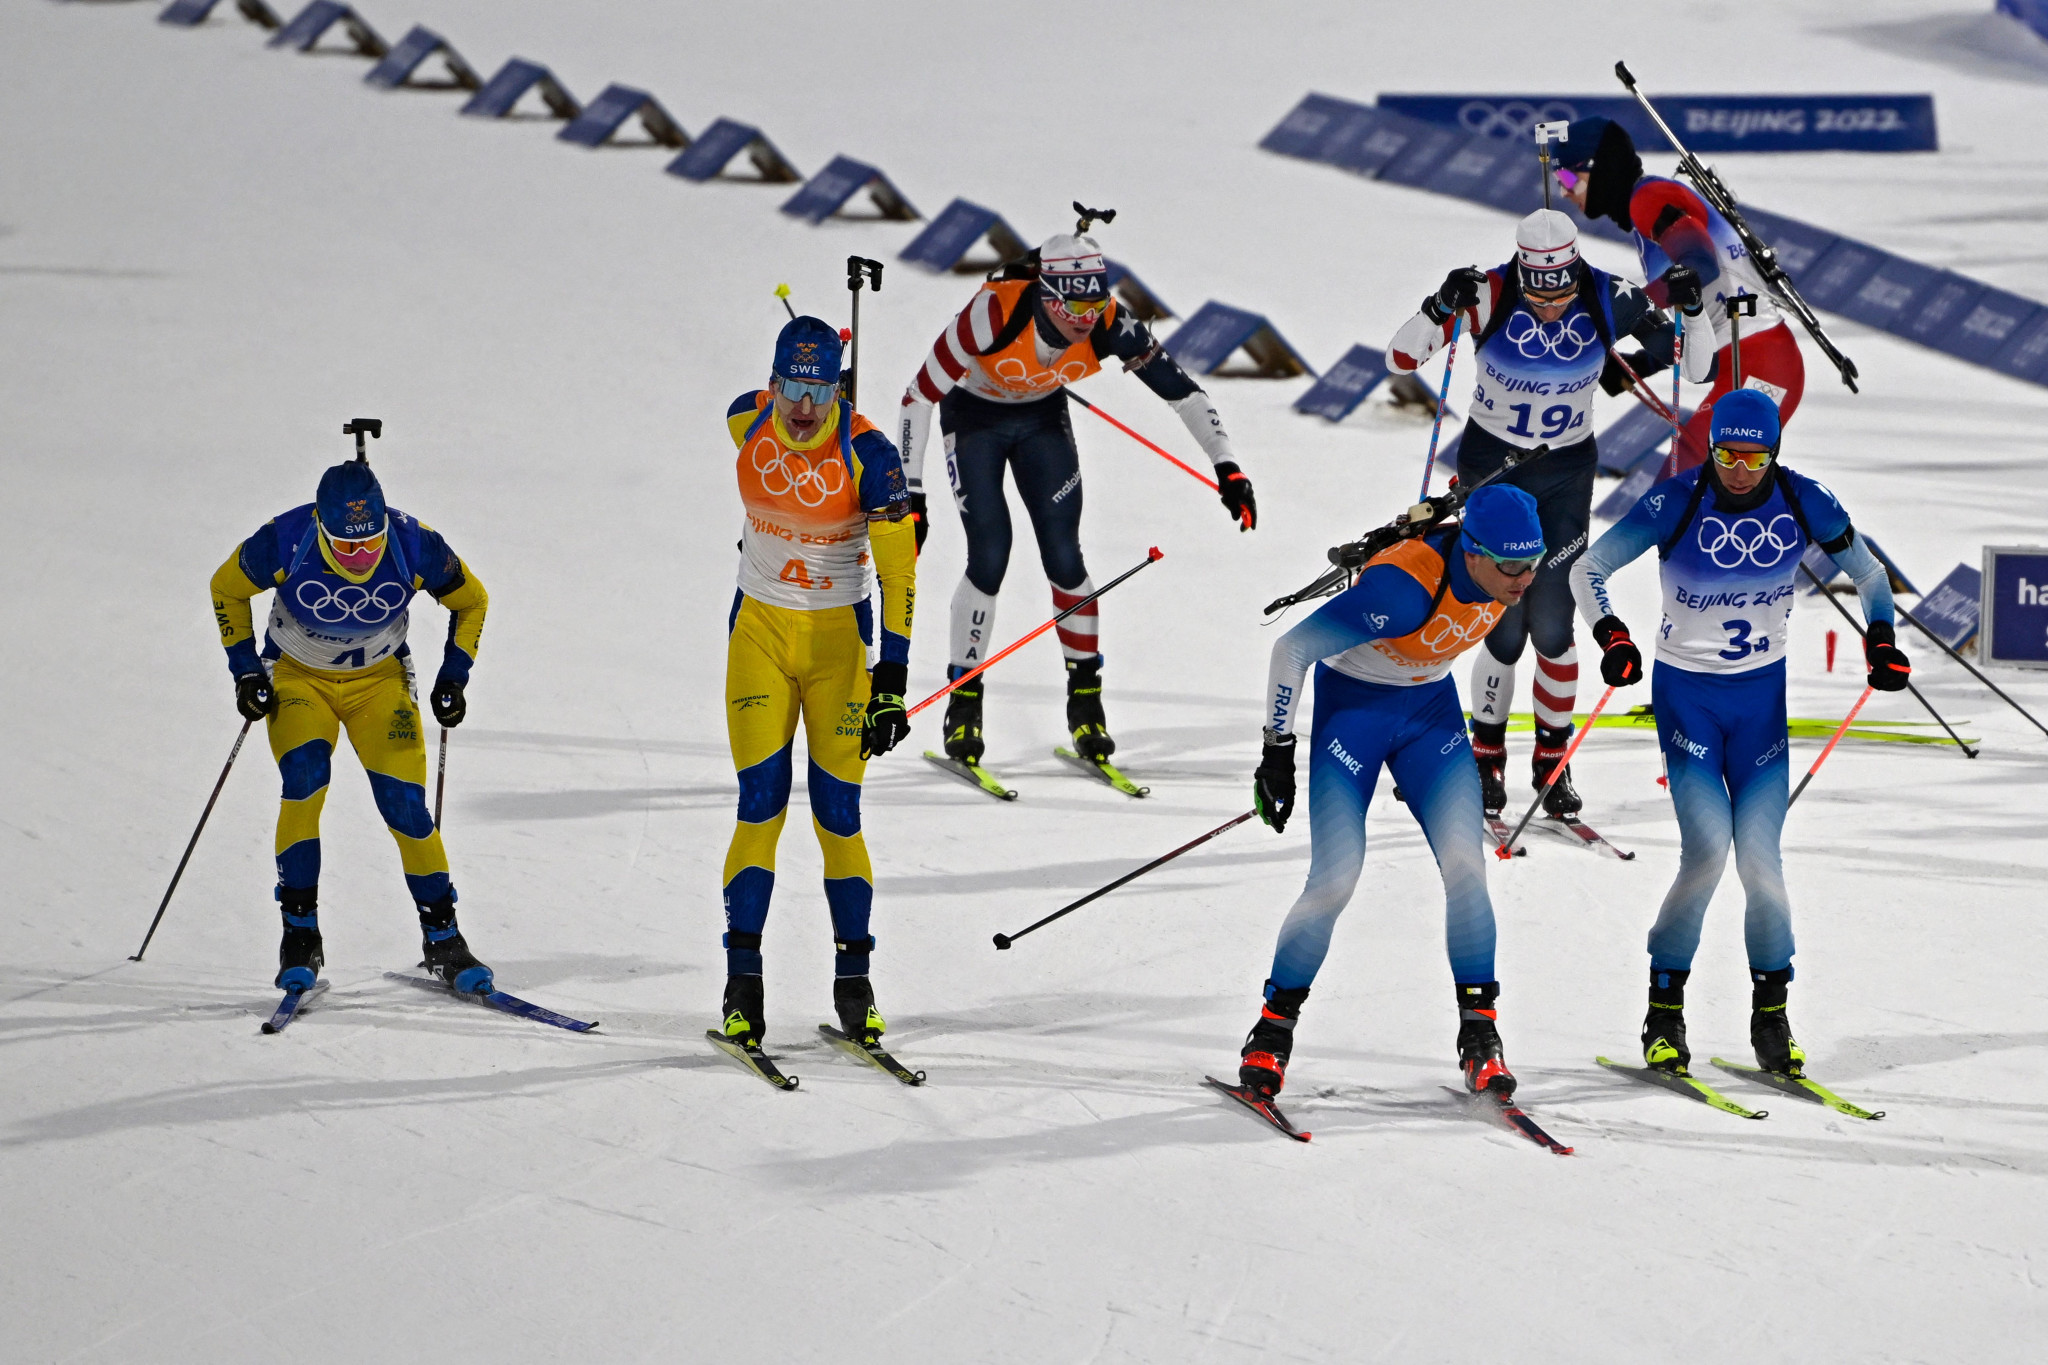 Teams of four have contested a biathlon mixed relay at the Winter Olympics since Sochi 2014 ©Getty Images